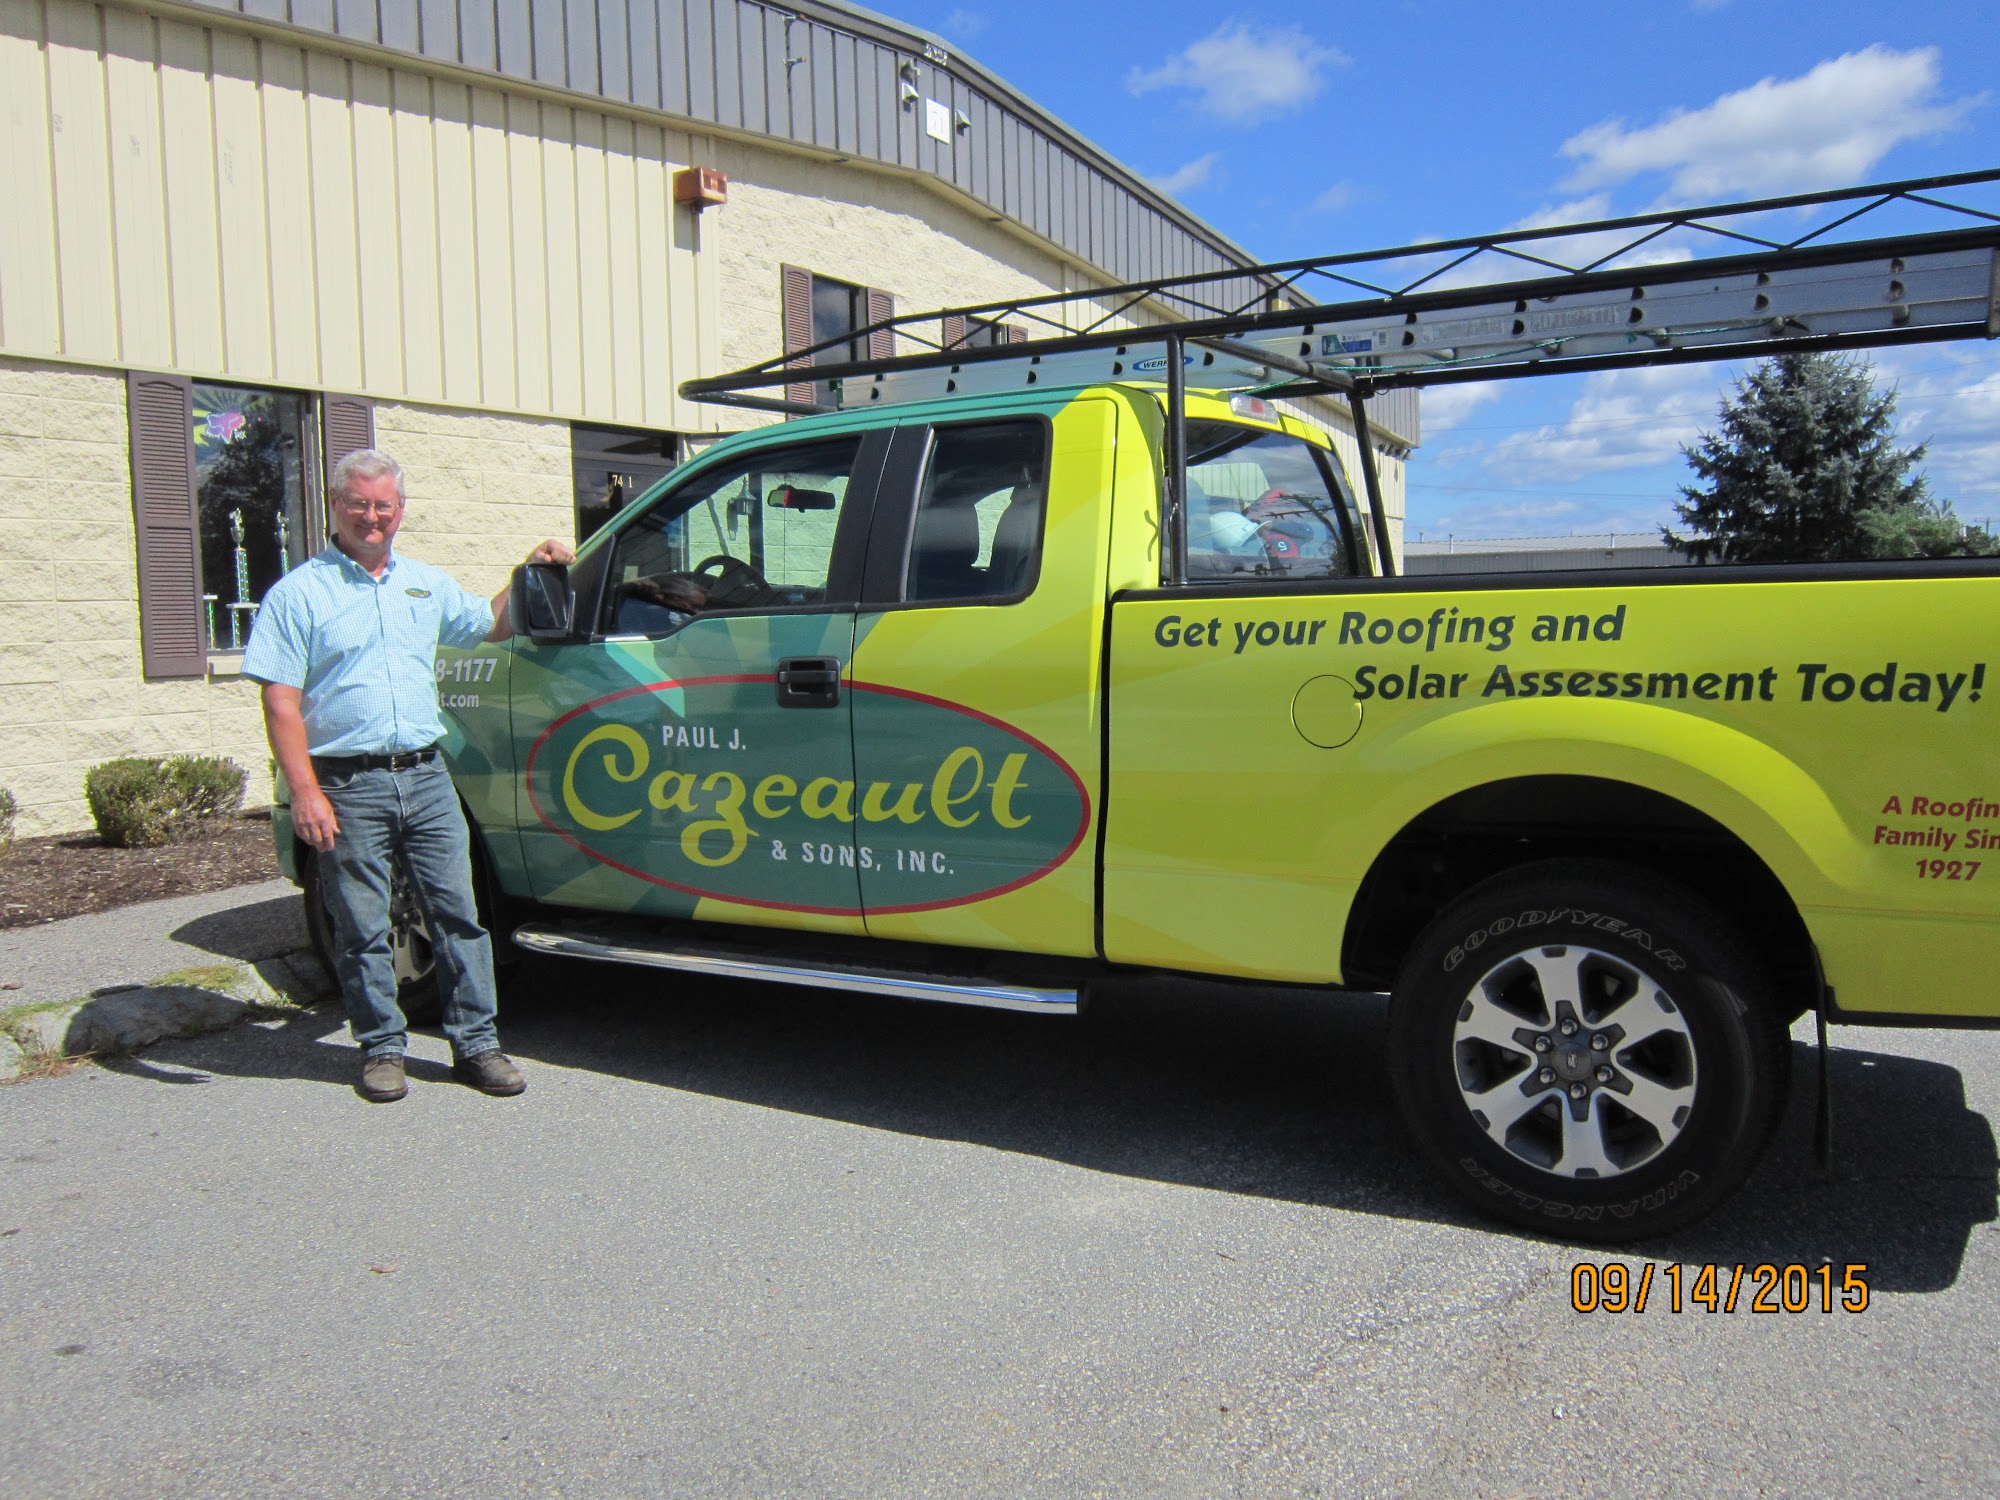 Cazeault Roofing & Solar of Plymouth County